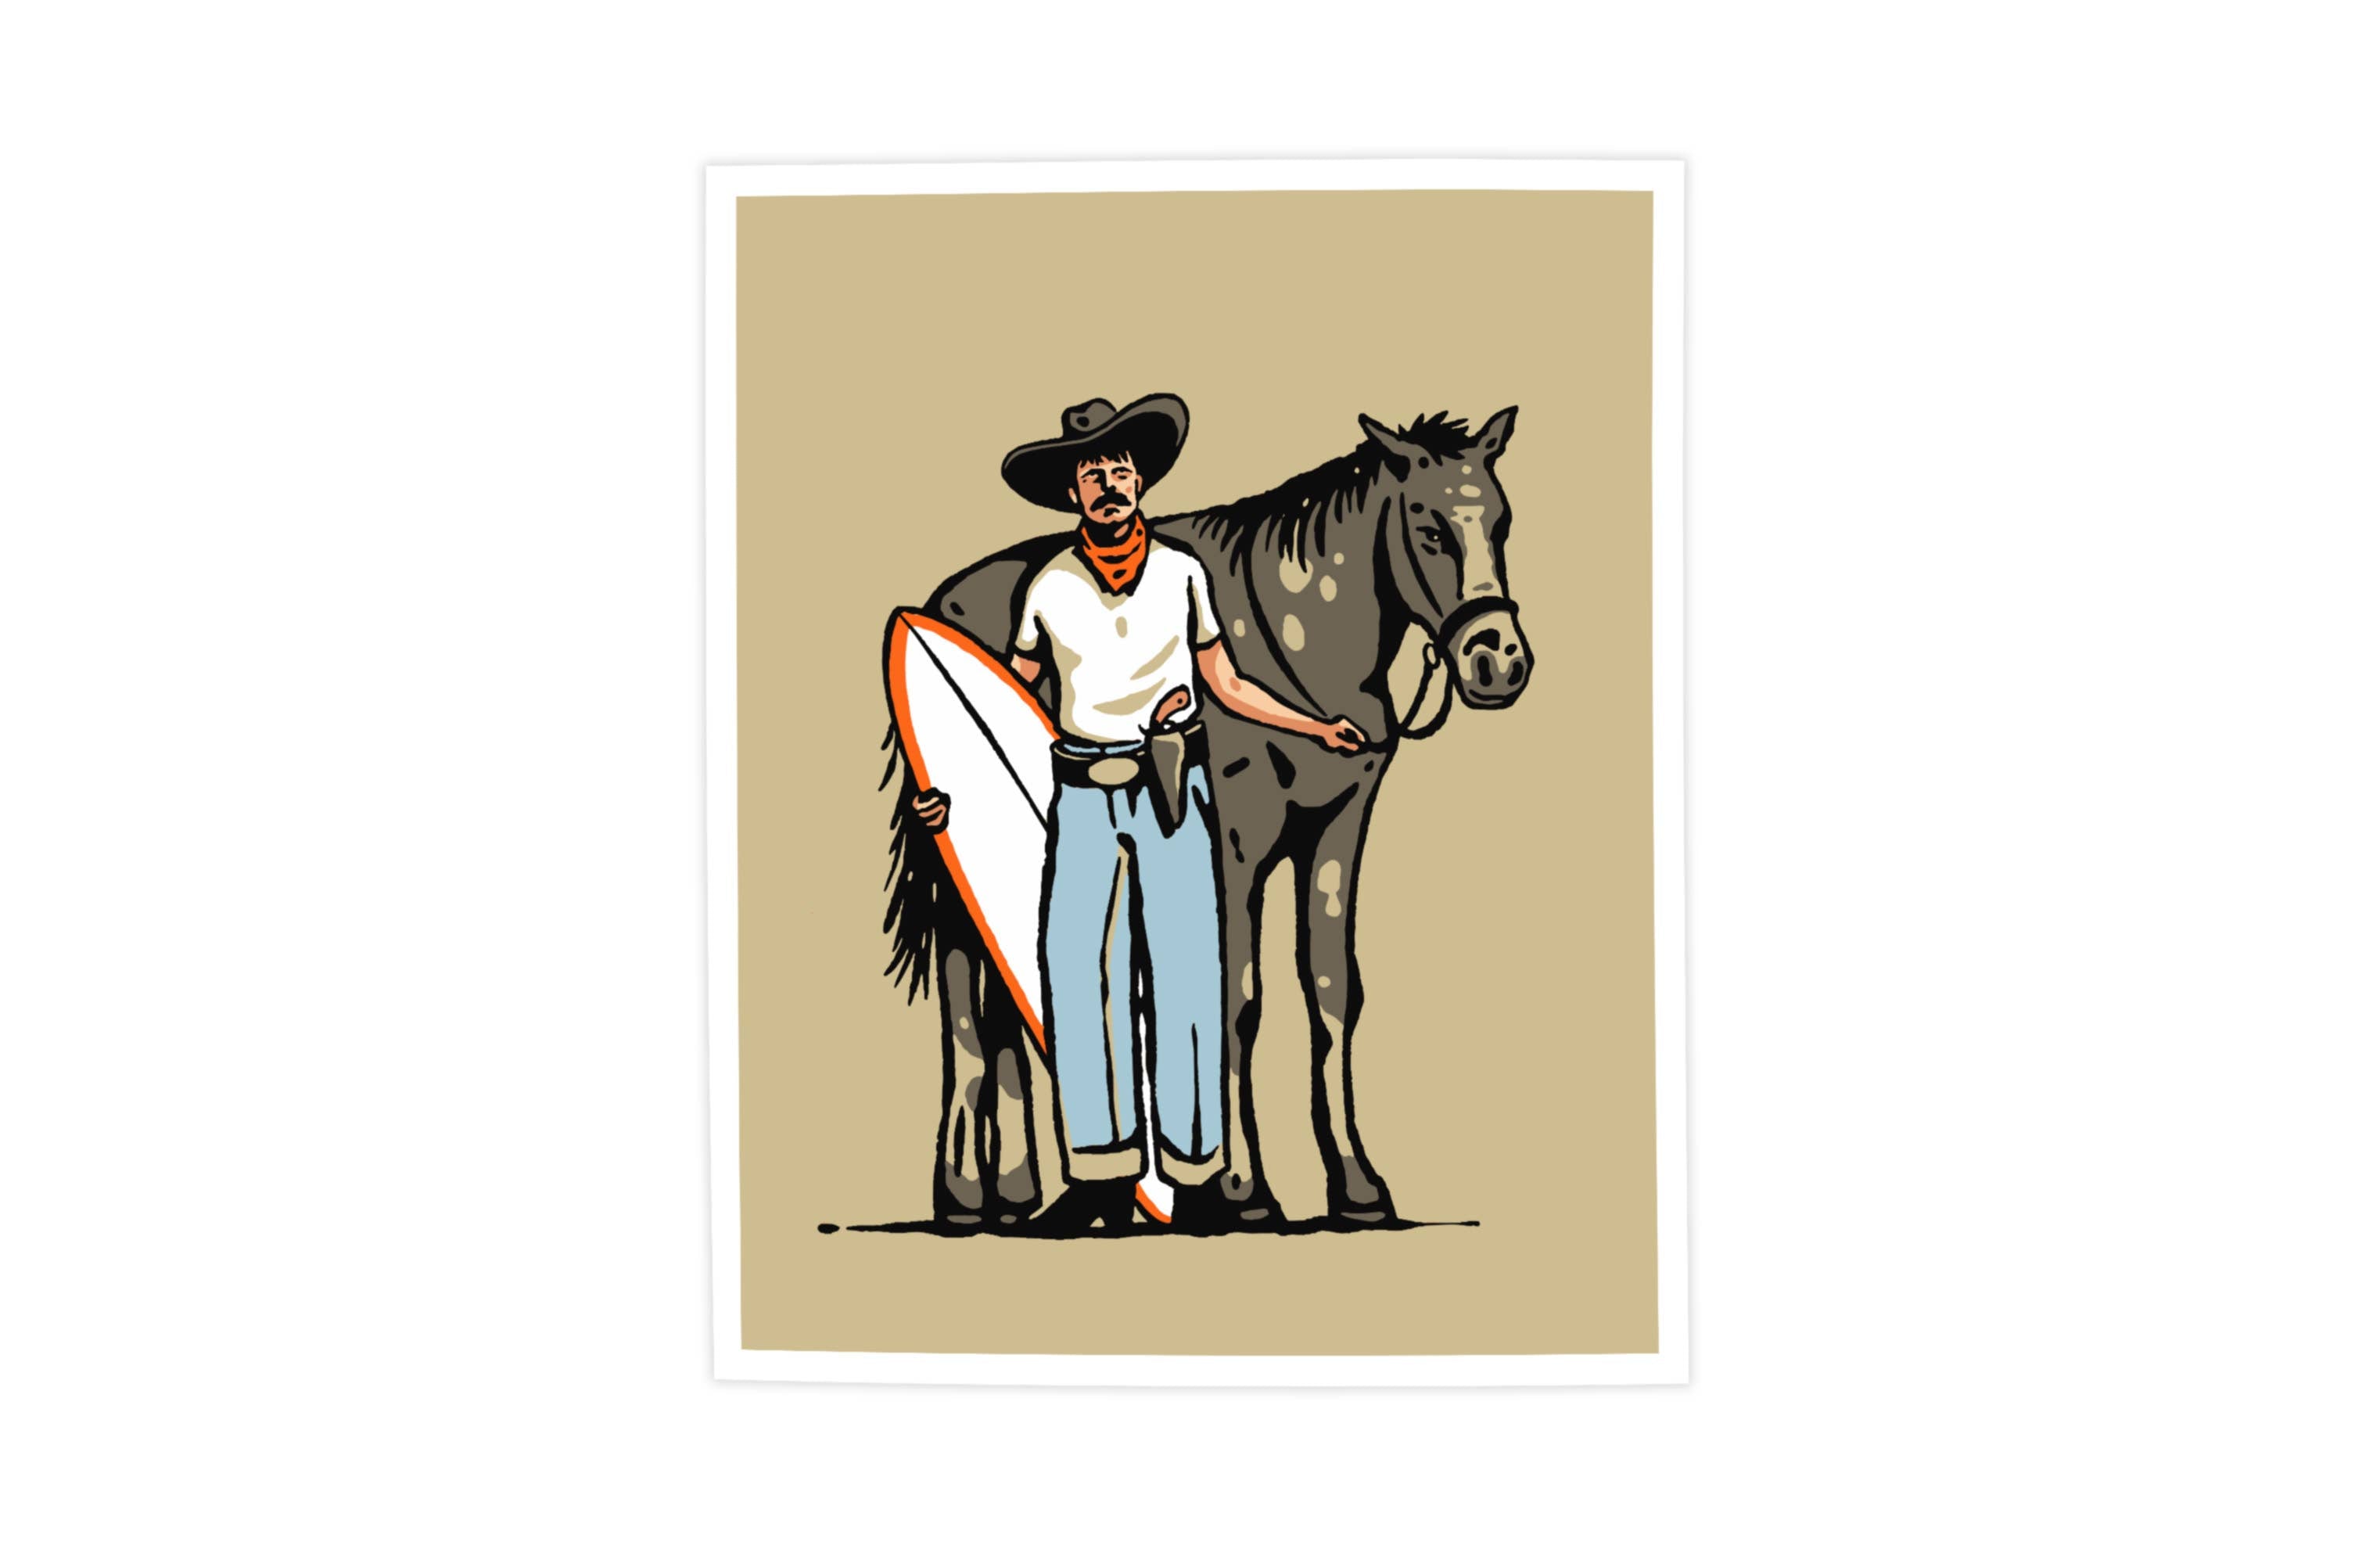 Kamin Tersieff - Old Red - Surf Cowboy Print - Horse Illustration Poster: 8x10